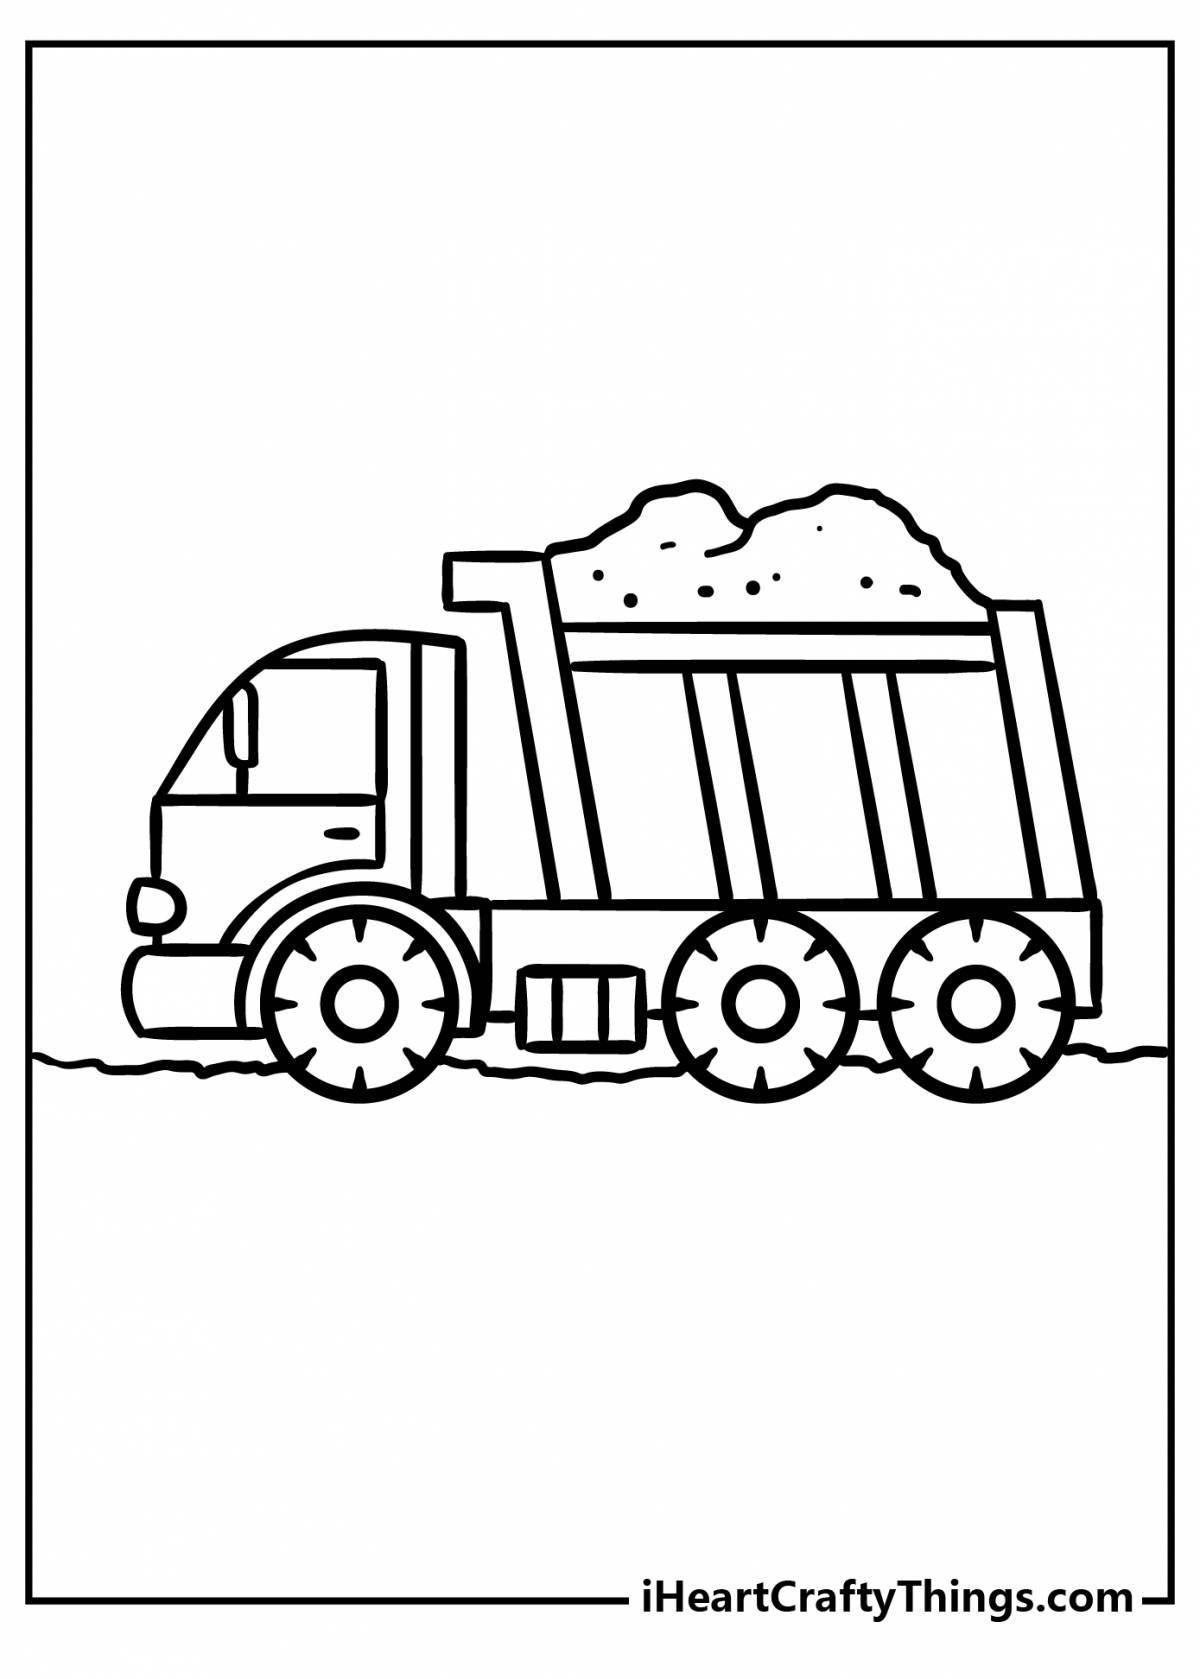 Gorgeous Garbage Truck Coloring Page for 3-4 year olds